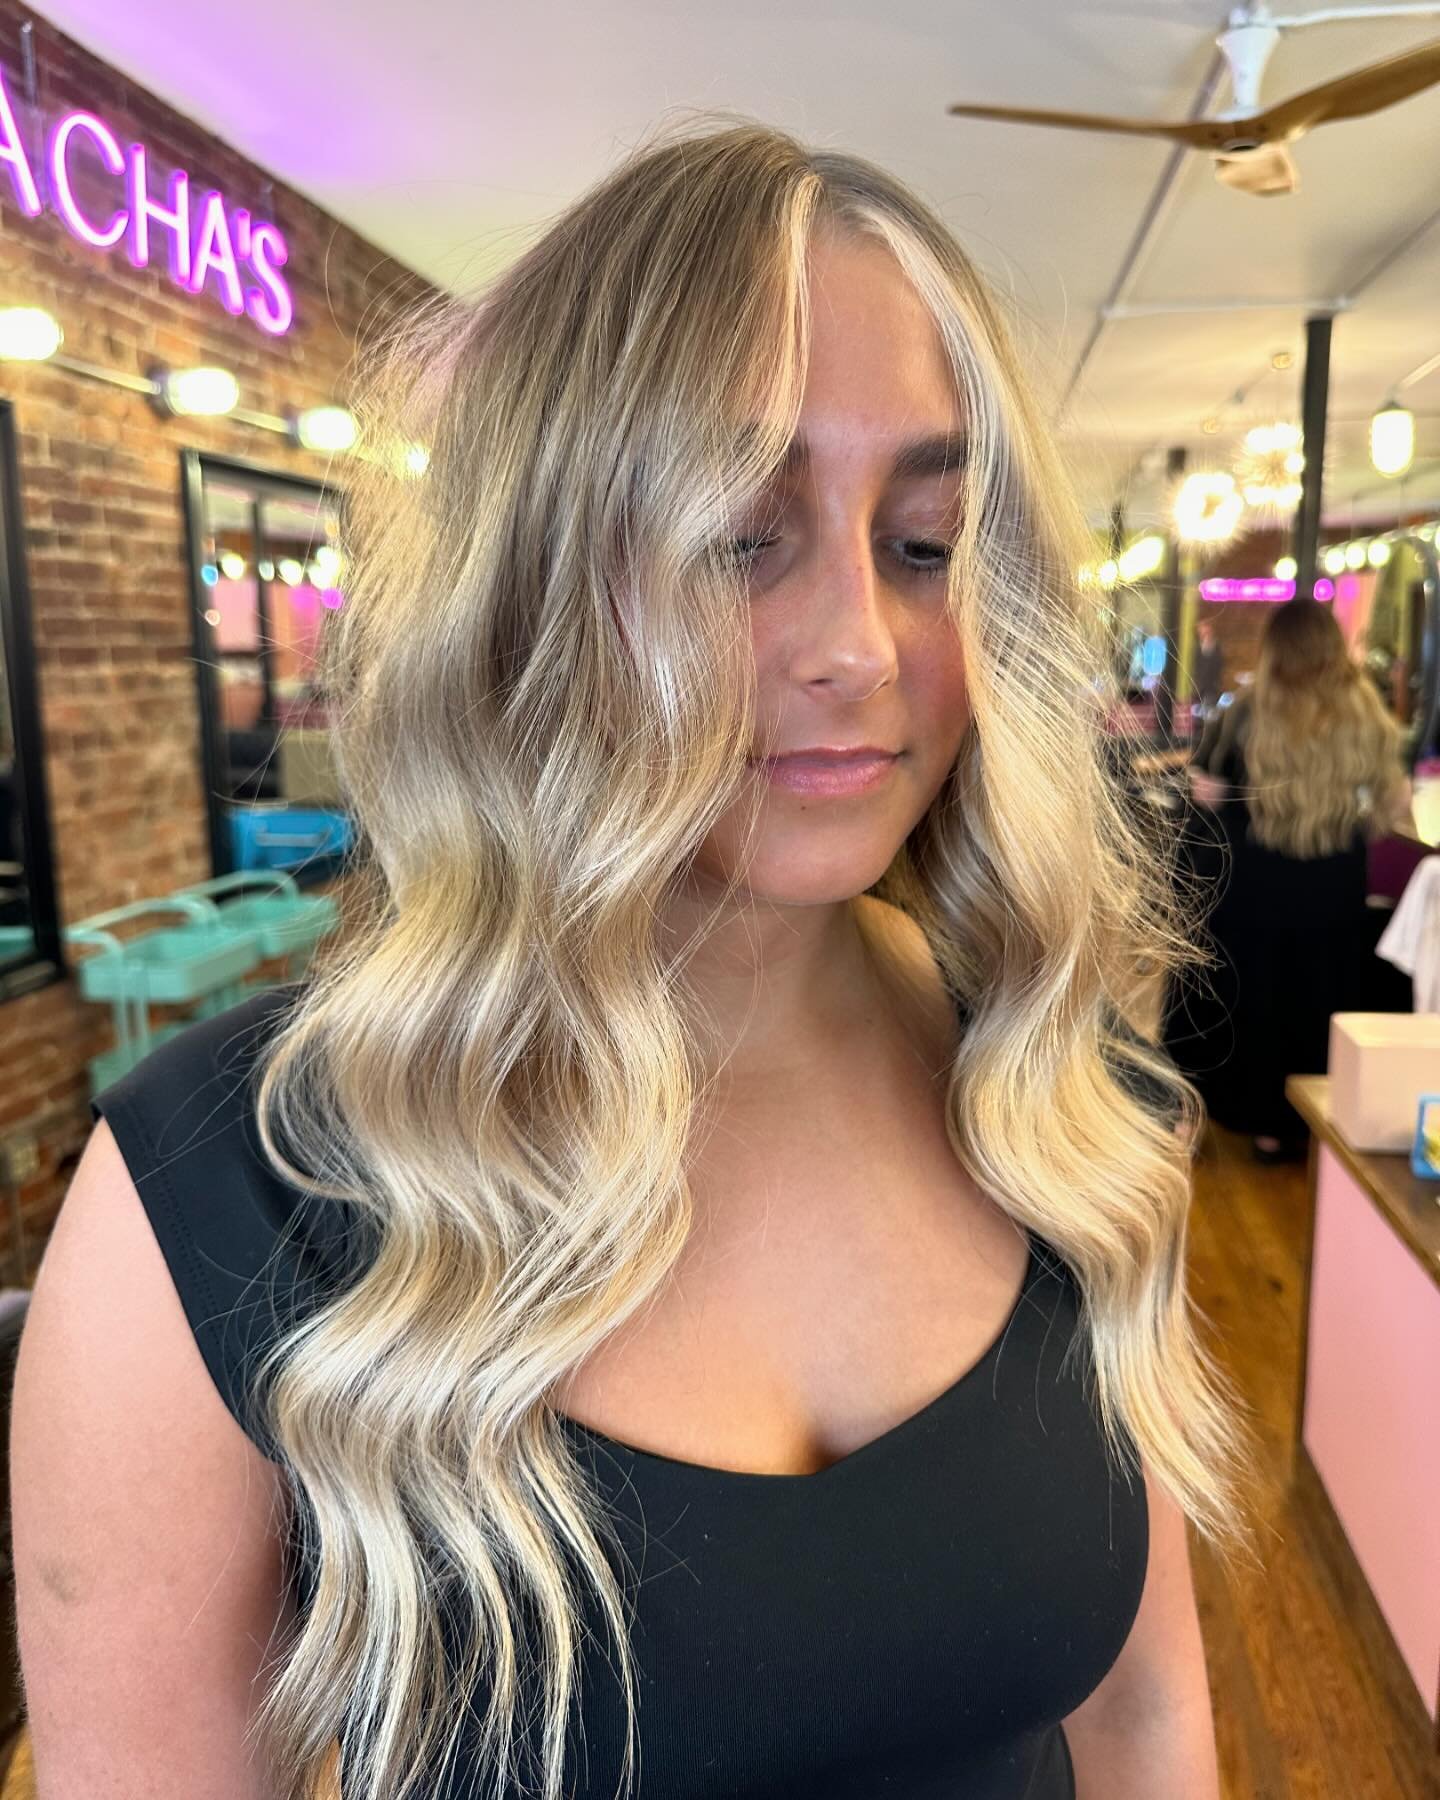 If you&rsquo;ve been looking for a sign to go blonde for summer, here it is&hellip;.this is your sign. 🚨🚨🚨

Foil/balayage combo on my Madi girl. @madi_dalexander 

#balayage #foilayage #summerblonde #universityofkentucky #kyhairs #kentuckyhairs #h